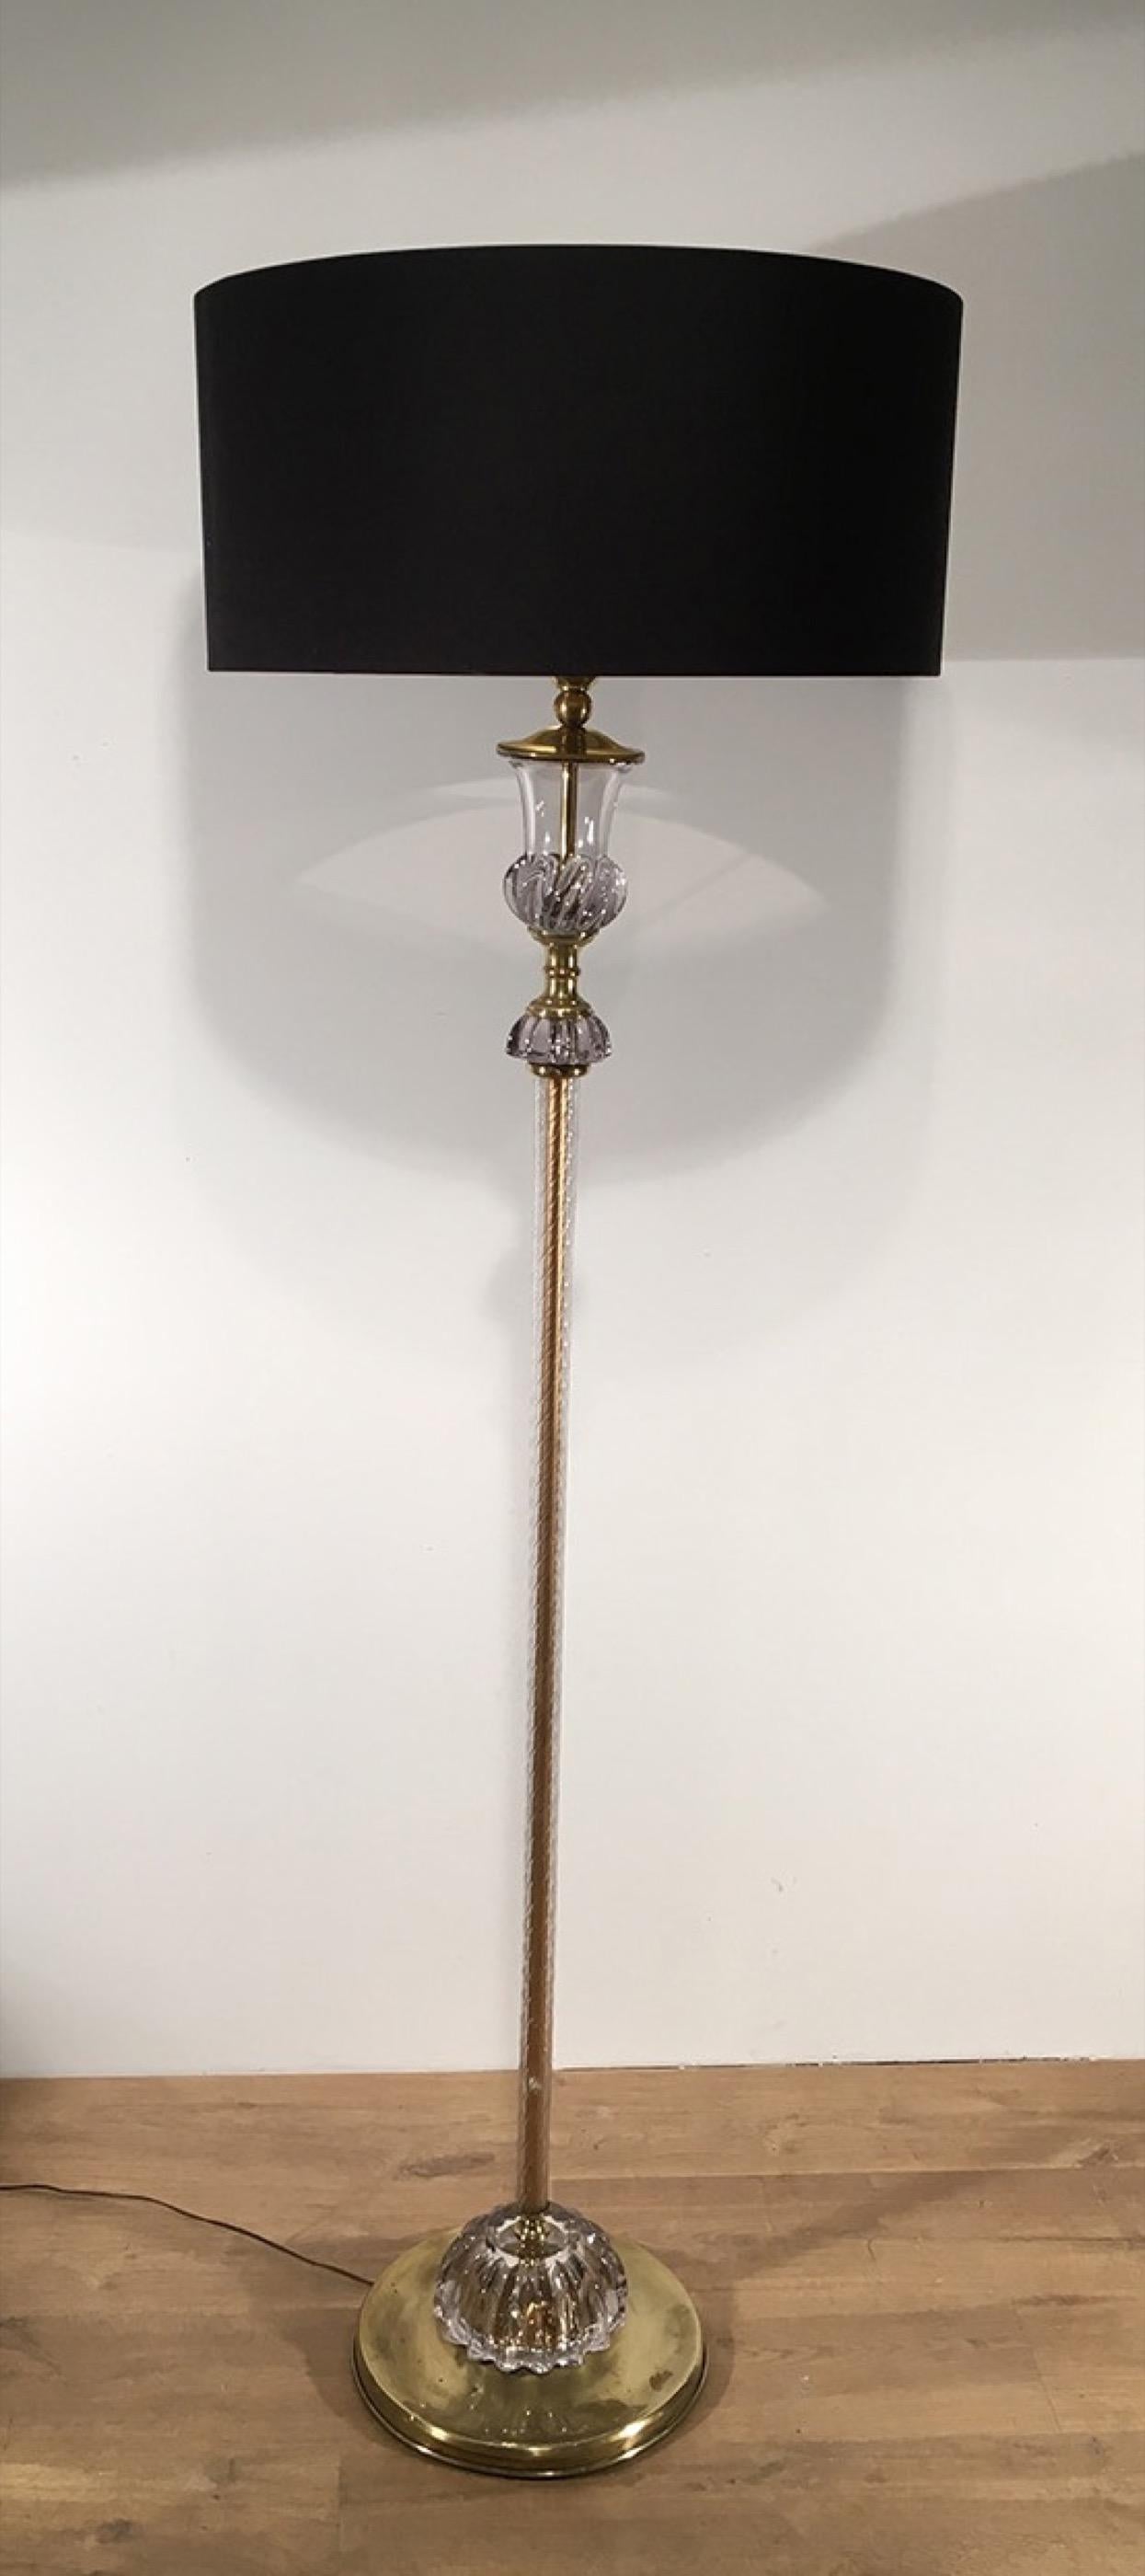 Attributed to Barovier & Toso, Murano Glass Floor Lamp, circa 1940 For Sale 4